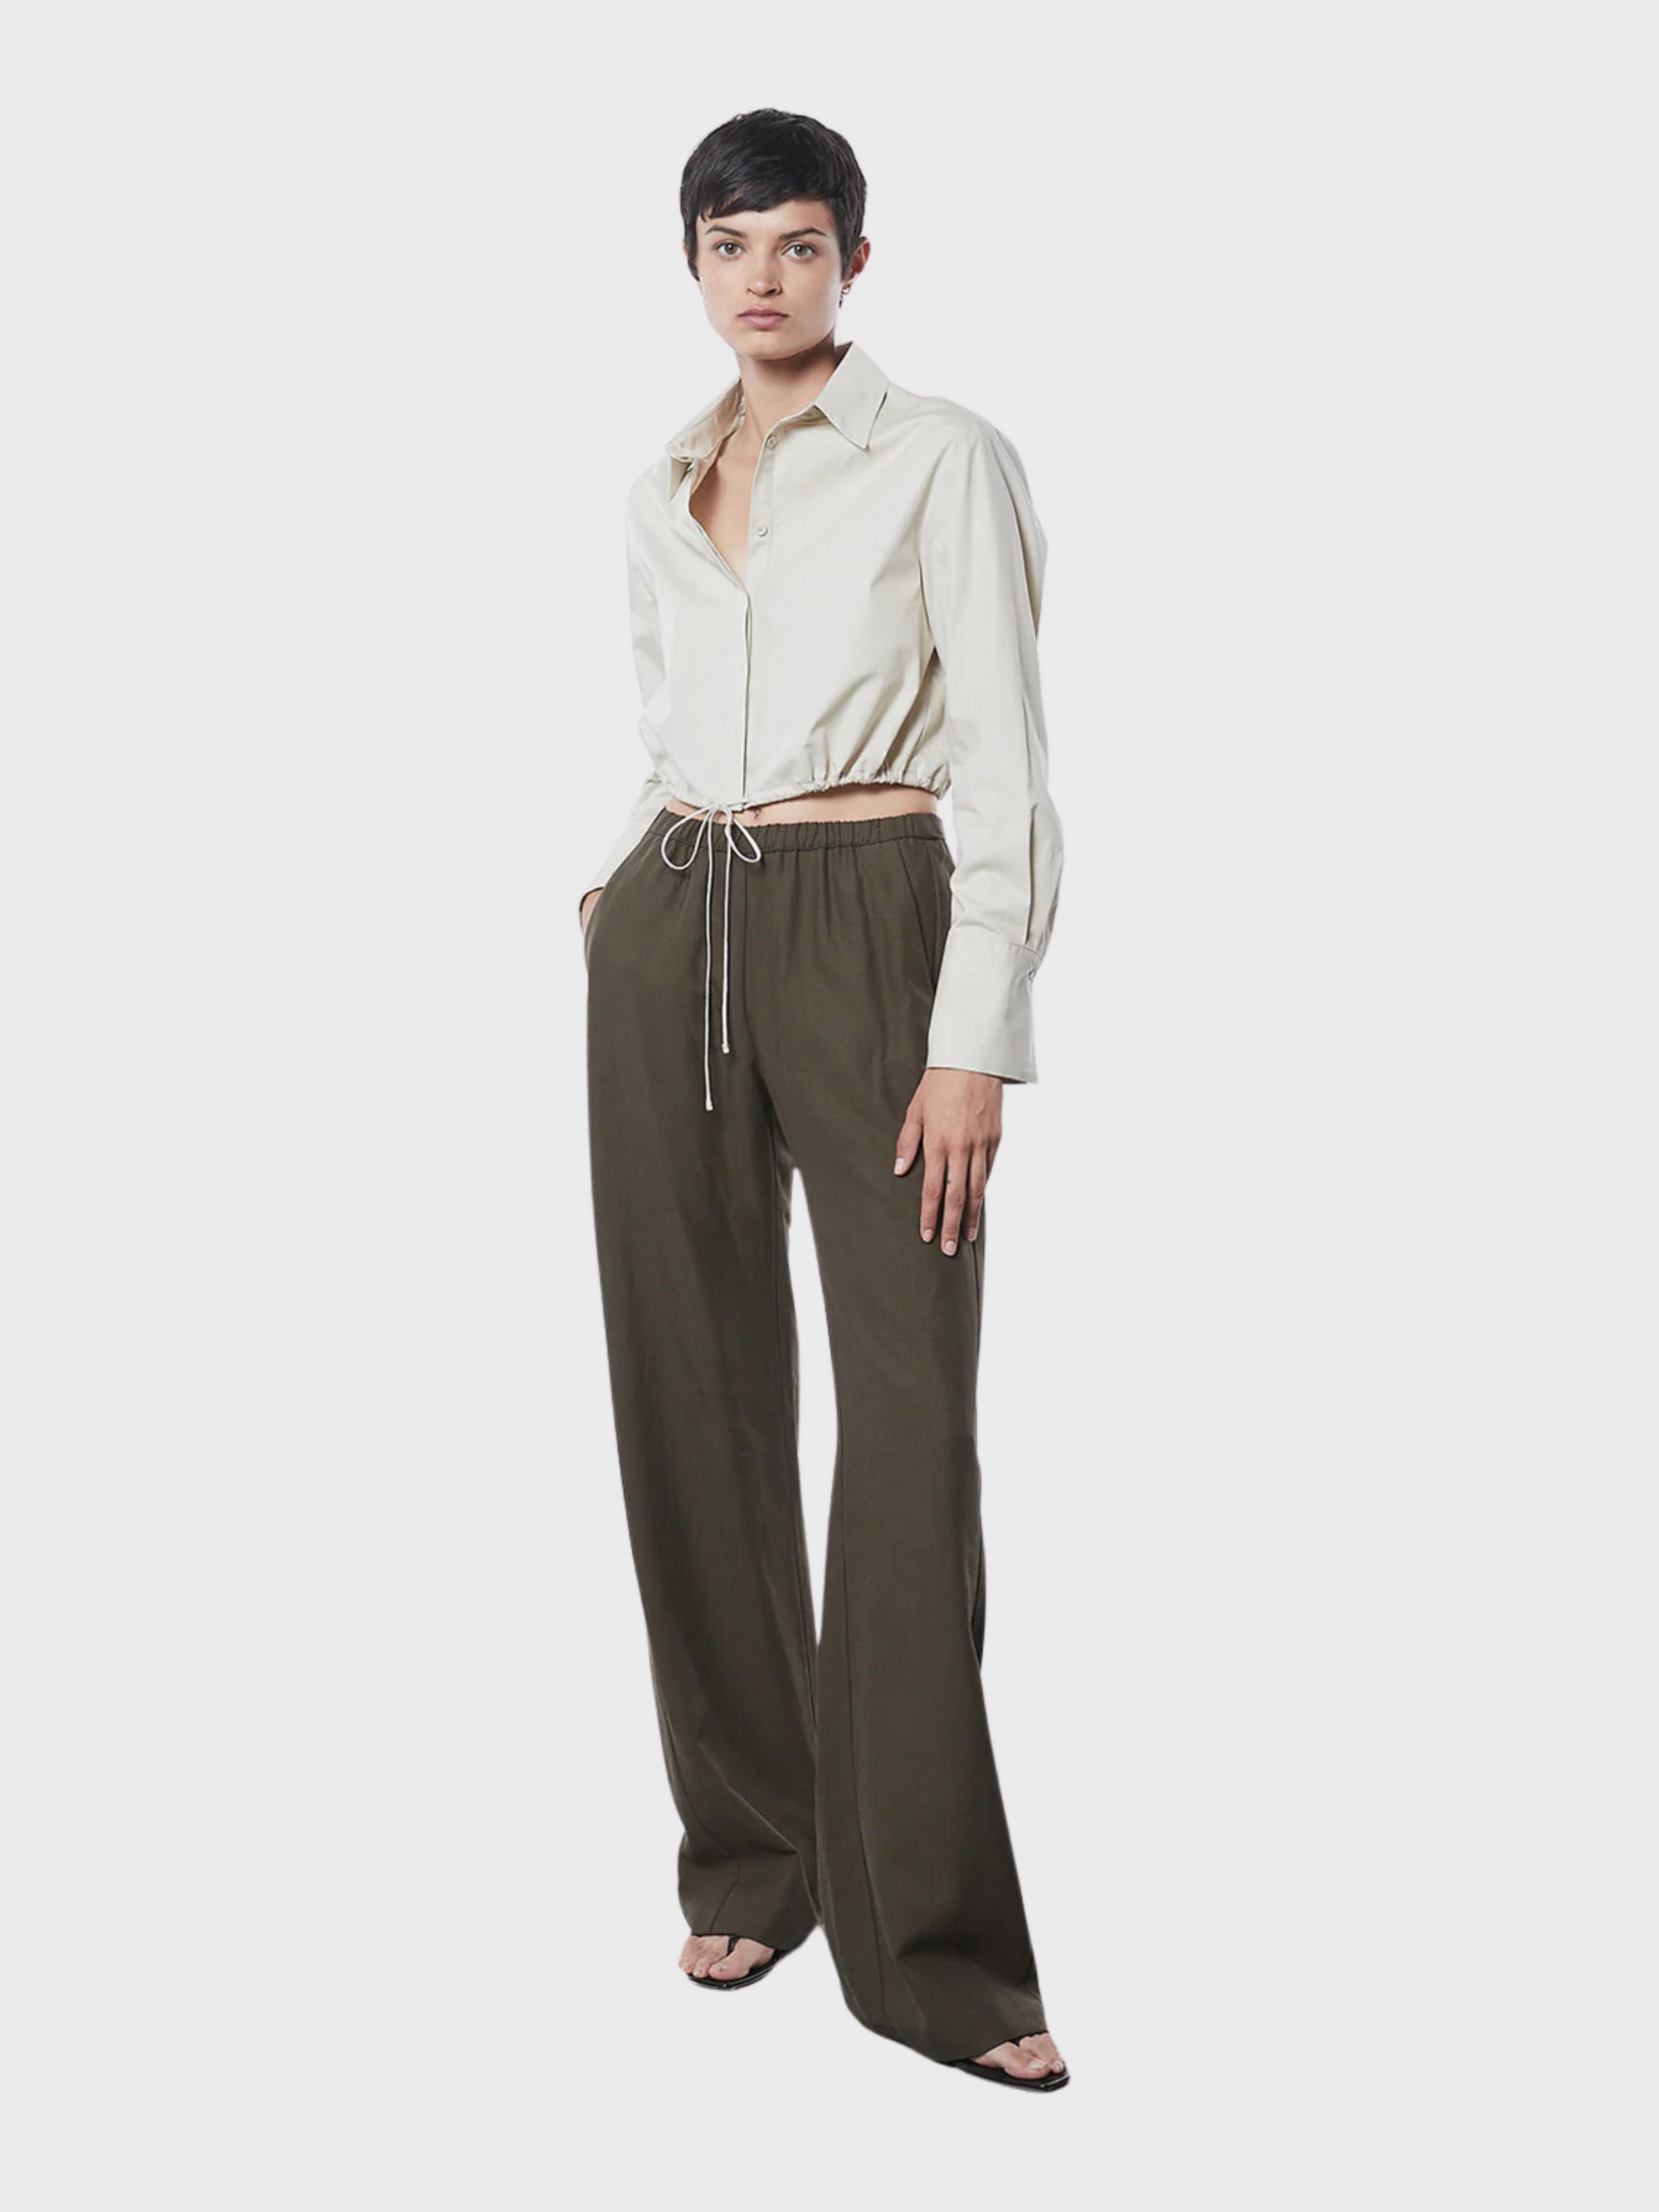 Enza Costa Twill Everywhere Pant Military-Pants-0-West of Woodward Boutique-Vancouver-Canada